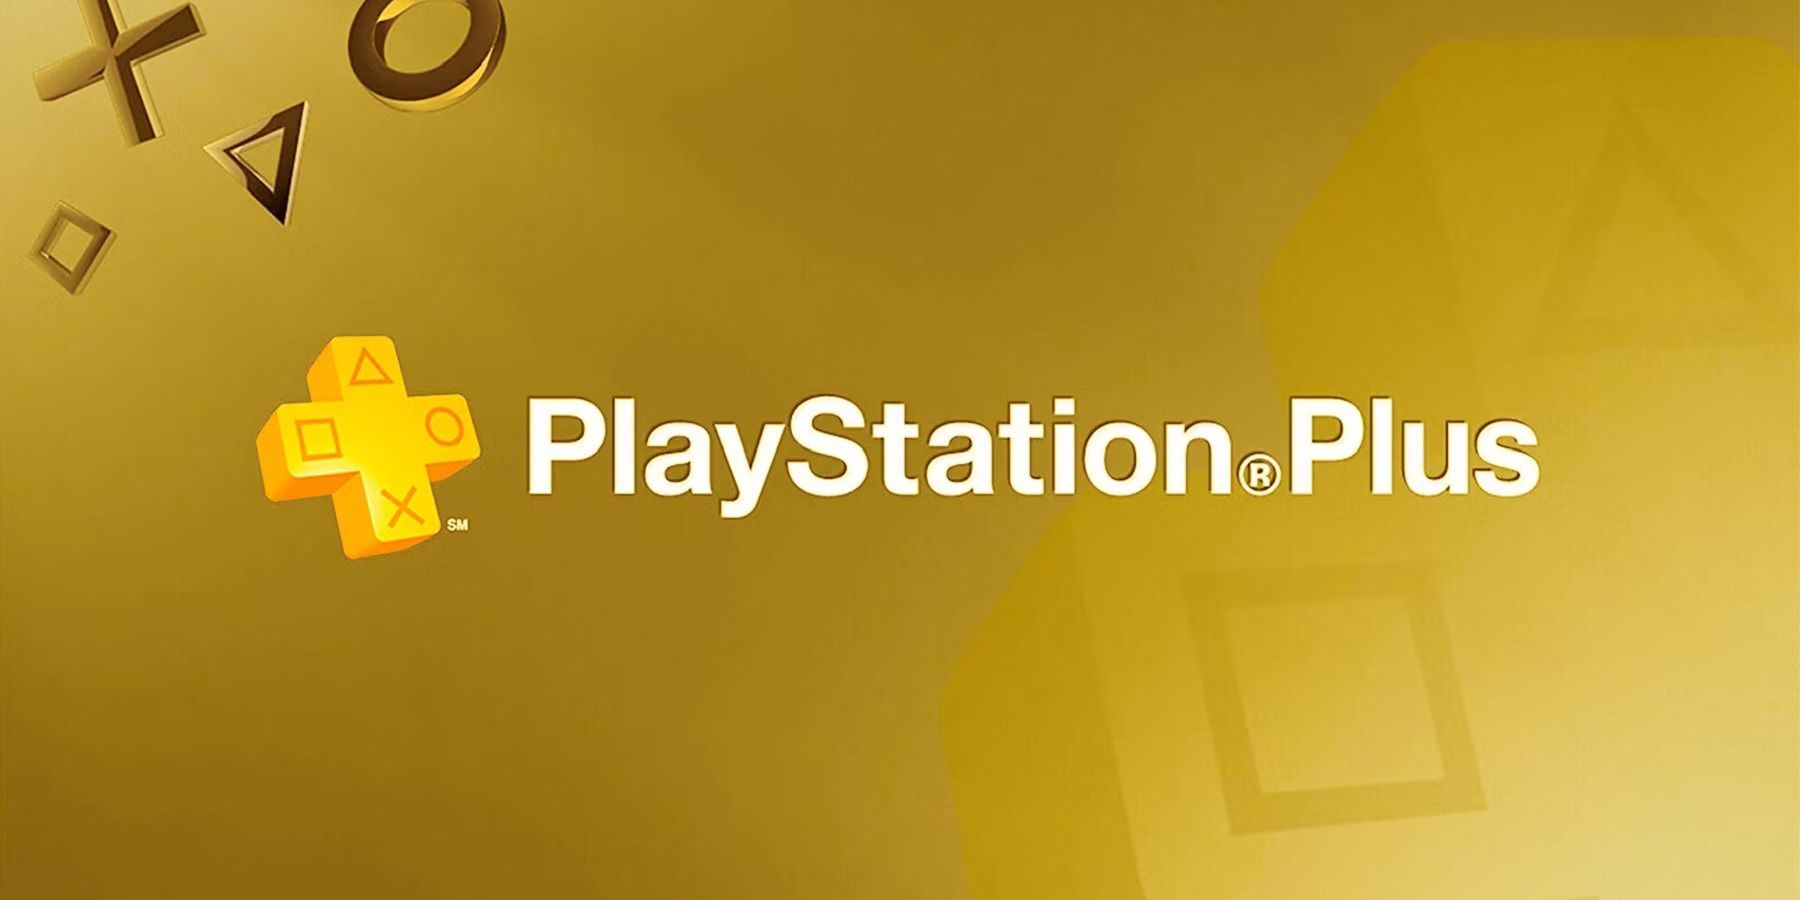 FIFA 22' headlines May's PlayStation Plus games